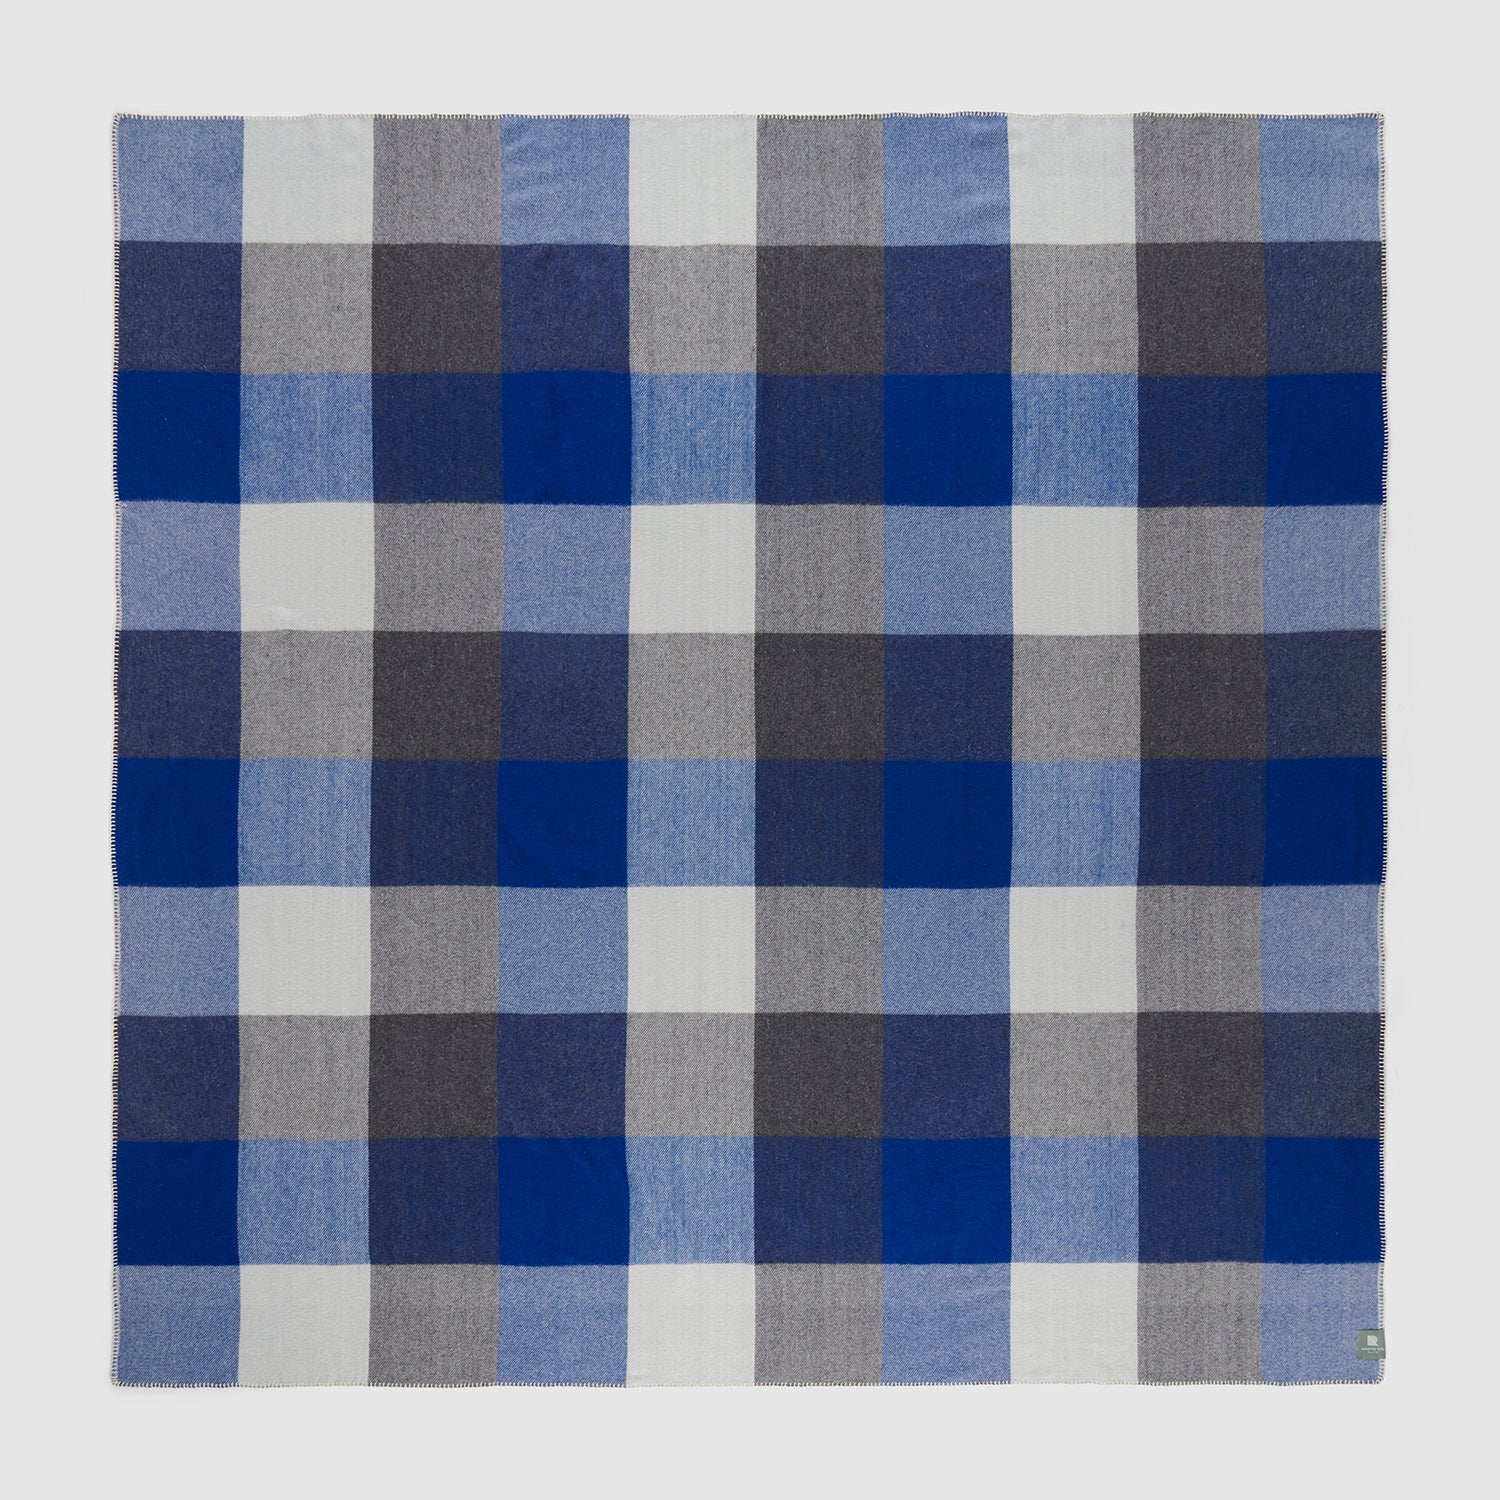 A full view of a seafarer check blanket showing the alternating checks of blue and grey.